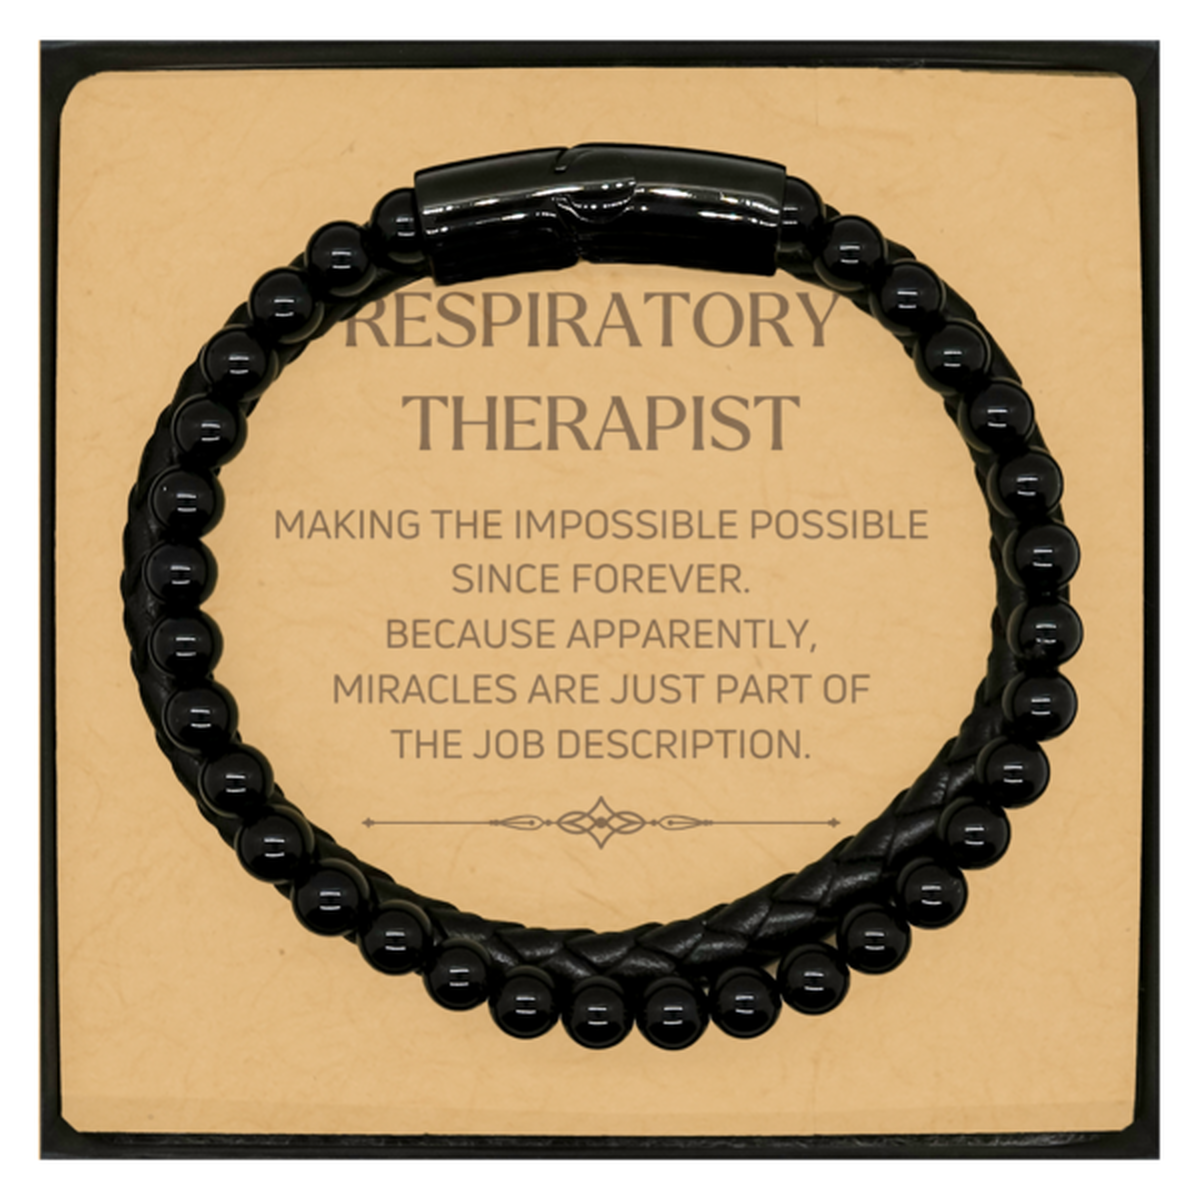 Funny Respiratory Therapist Gifts, Miracles are just part of the job description, Inspirational Birthday Christmas Stone Leather Bracelets For Respiratory Therapist, Men, Women, Coworkers, Friends, Boss